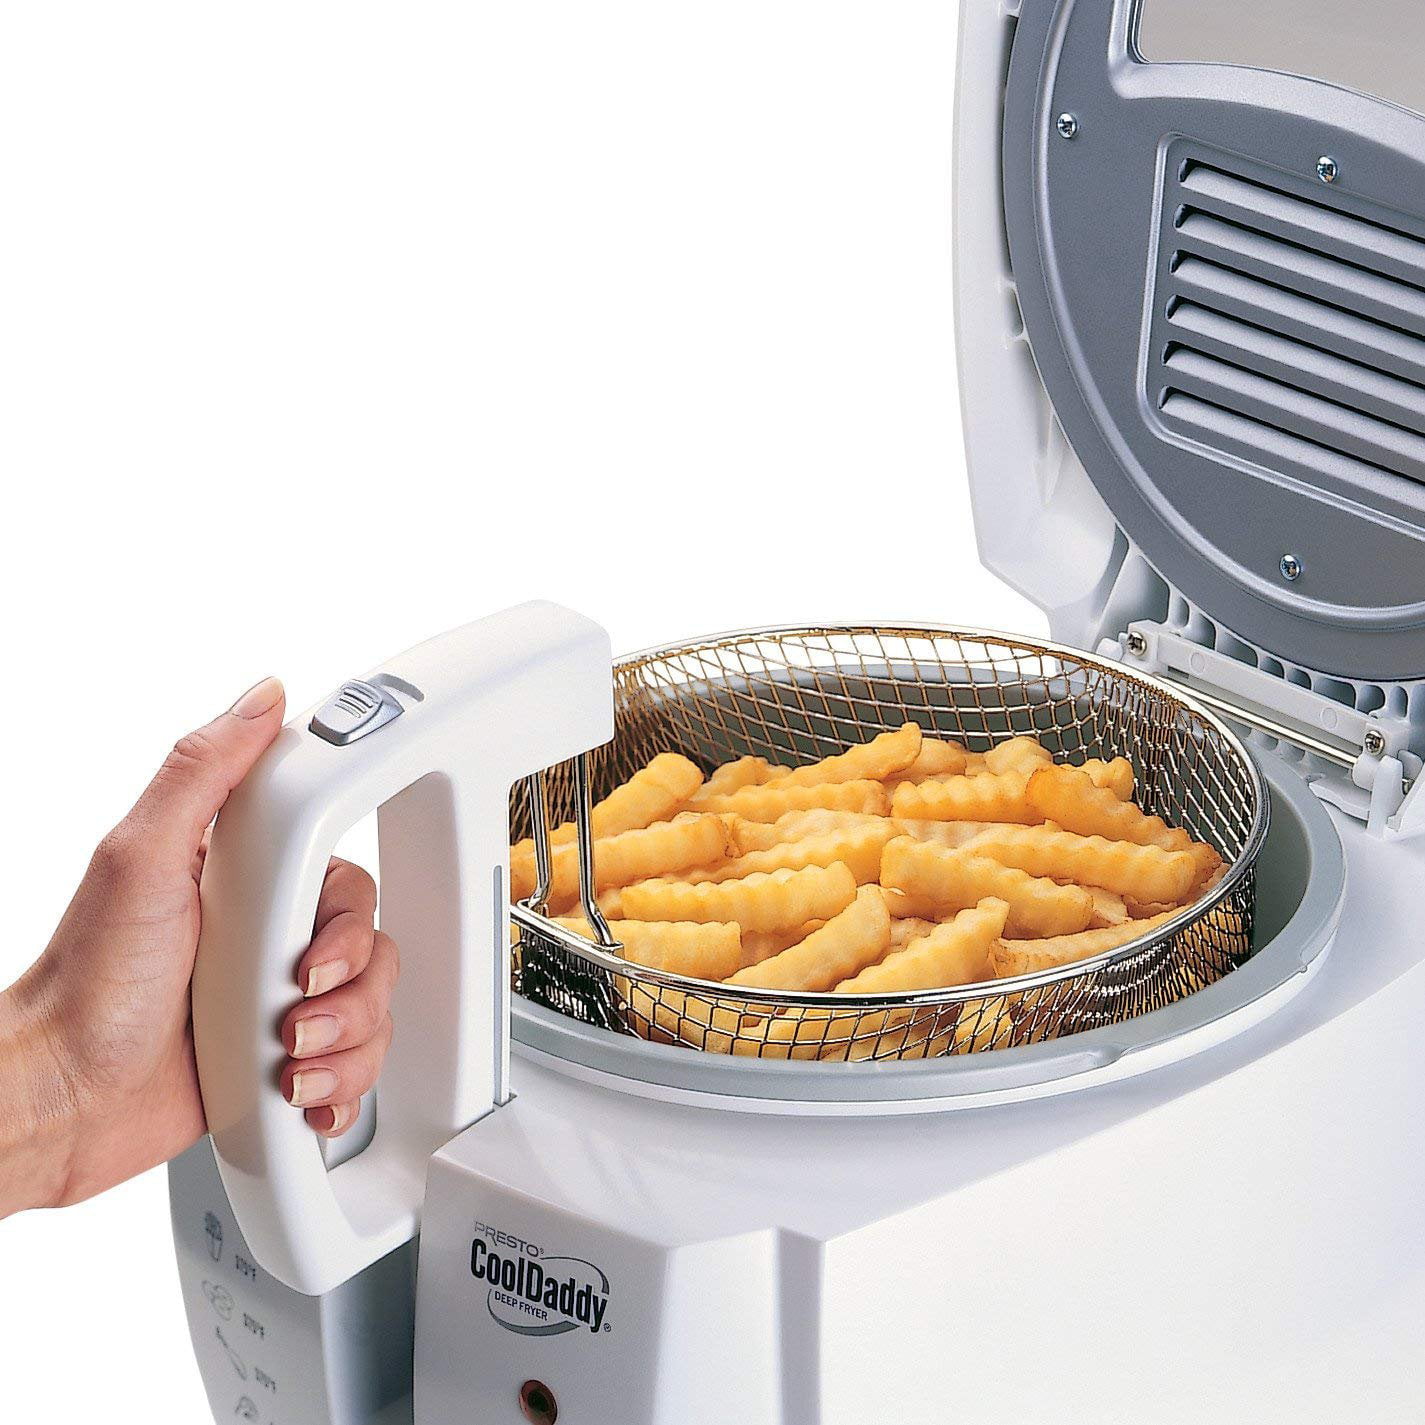 Presto CoolDaddy cool-touch Deep Fryer - household items - by owner -  housewares sale - craigslist